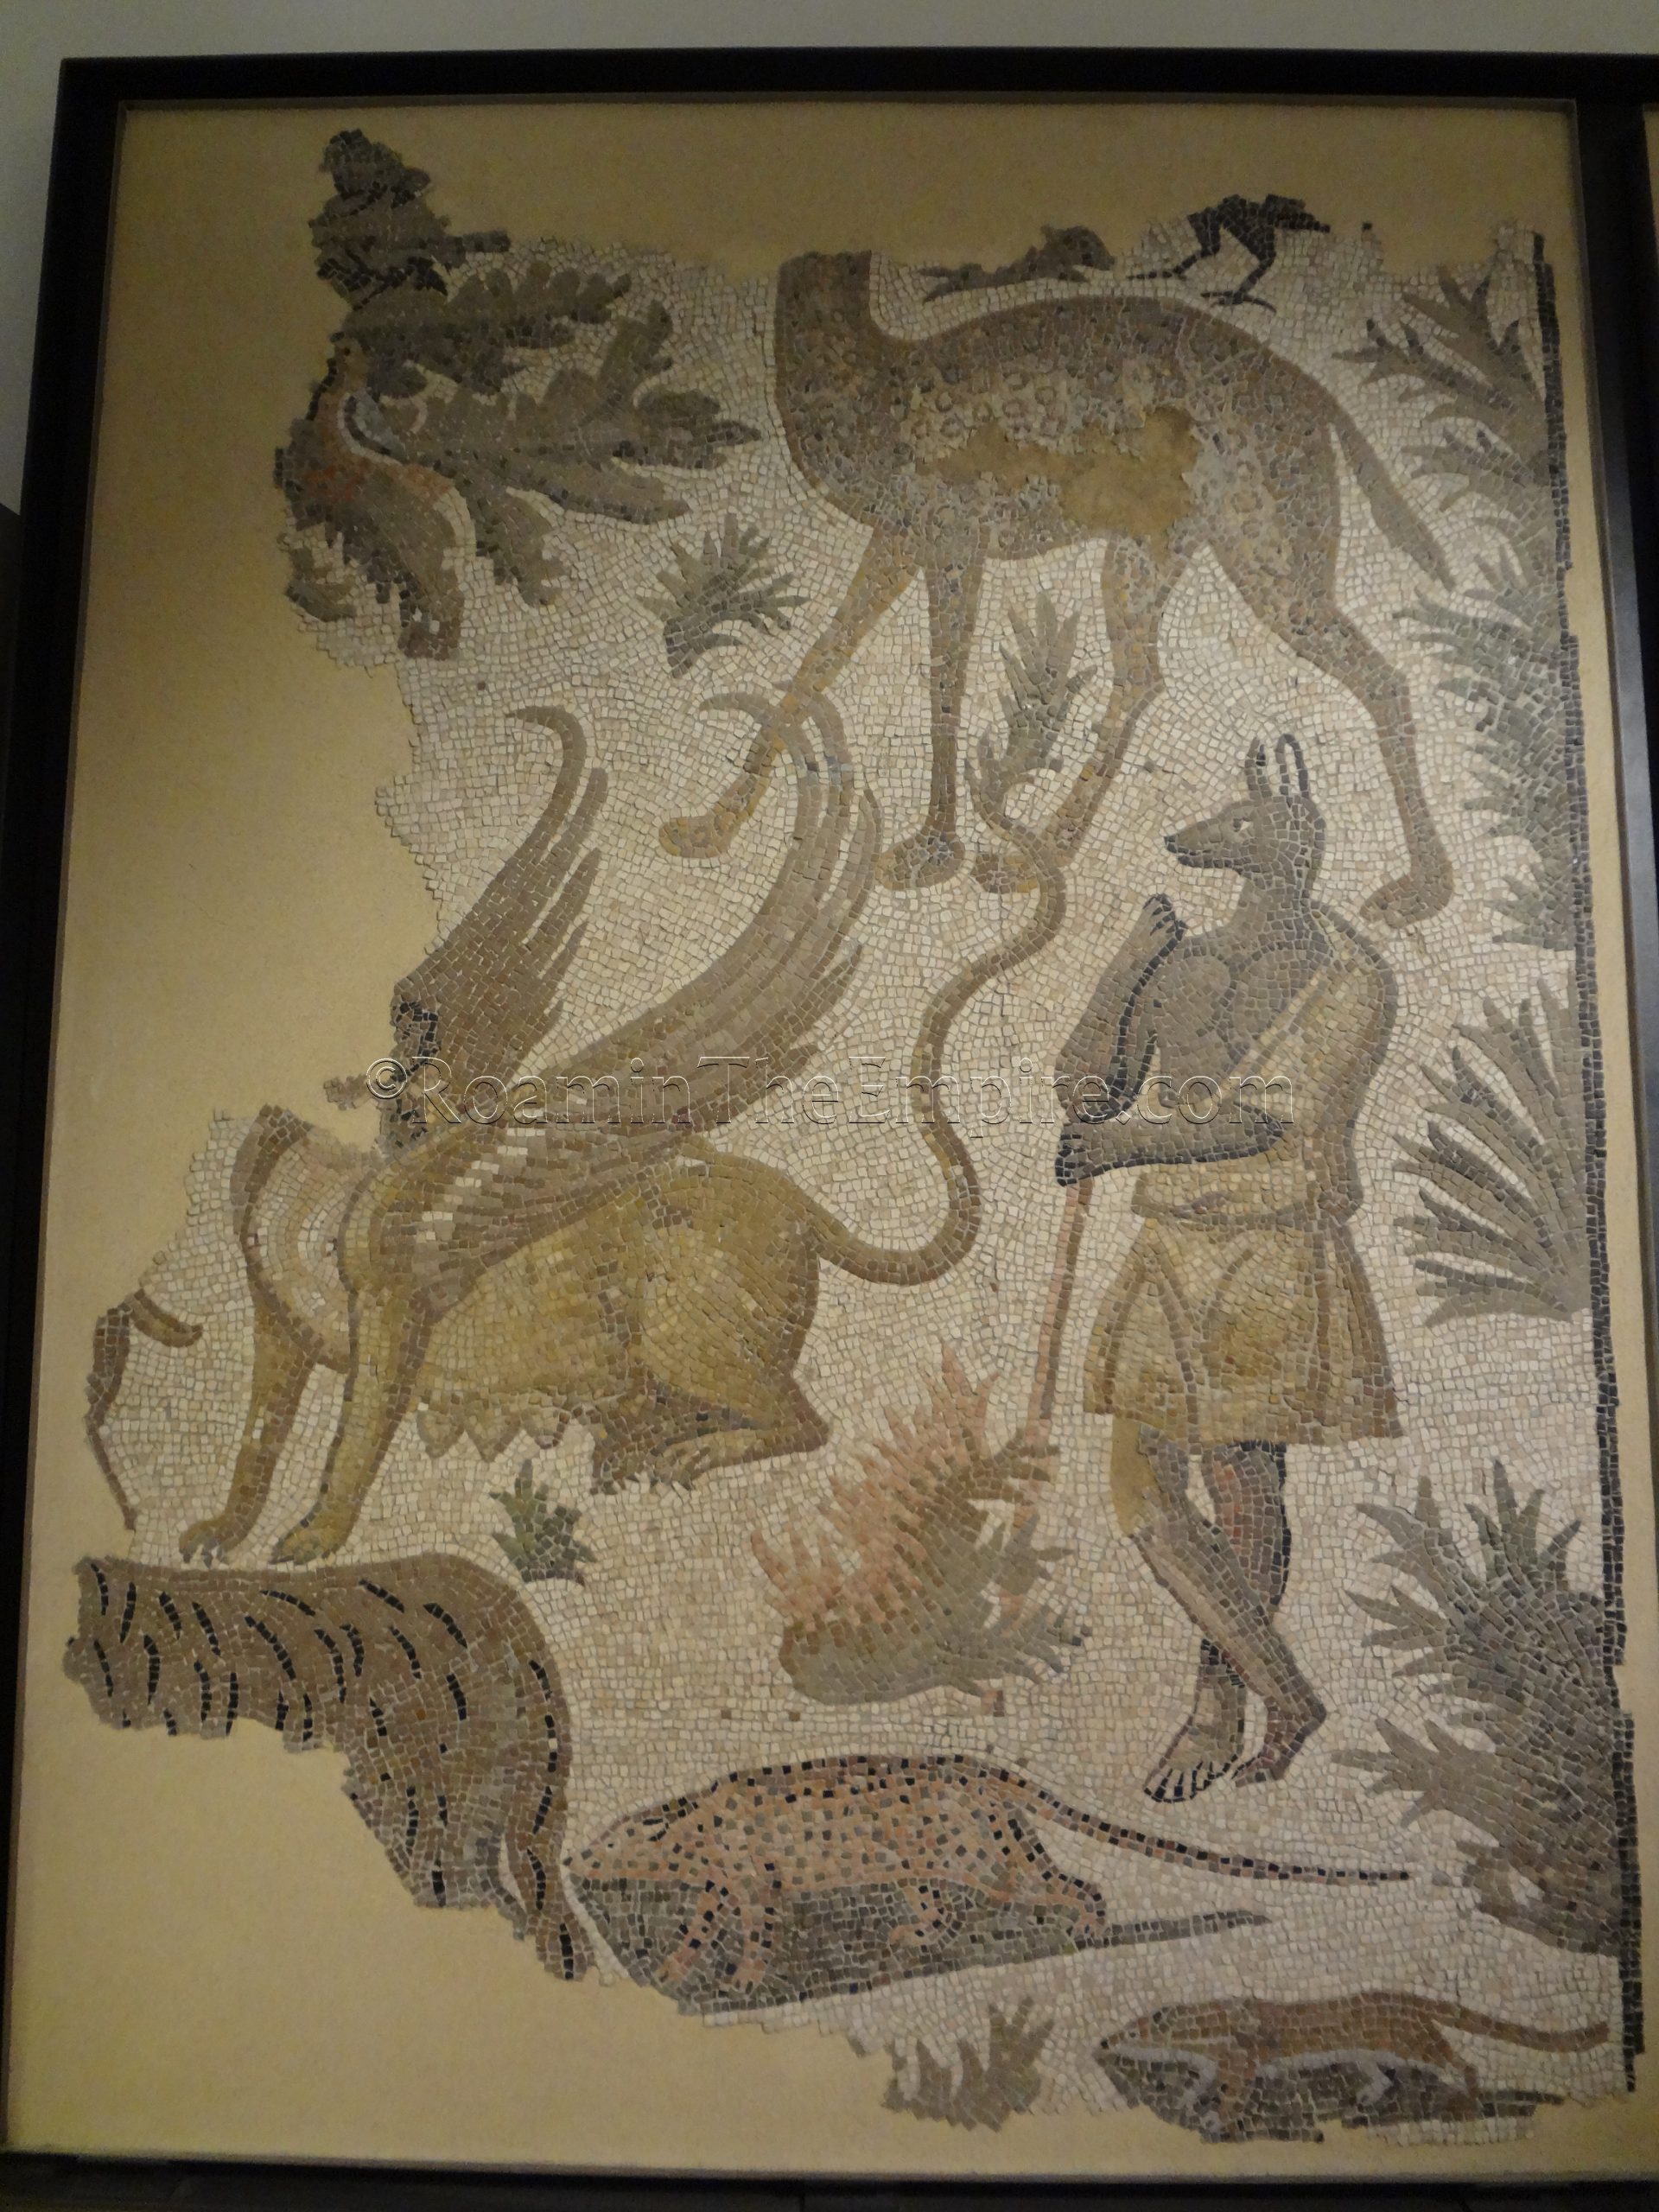 Anubis mosaic in the Museo della Città. Found locally at Via Fratelli Bandiera and dated to the late 2nd or early 3rd century CE.